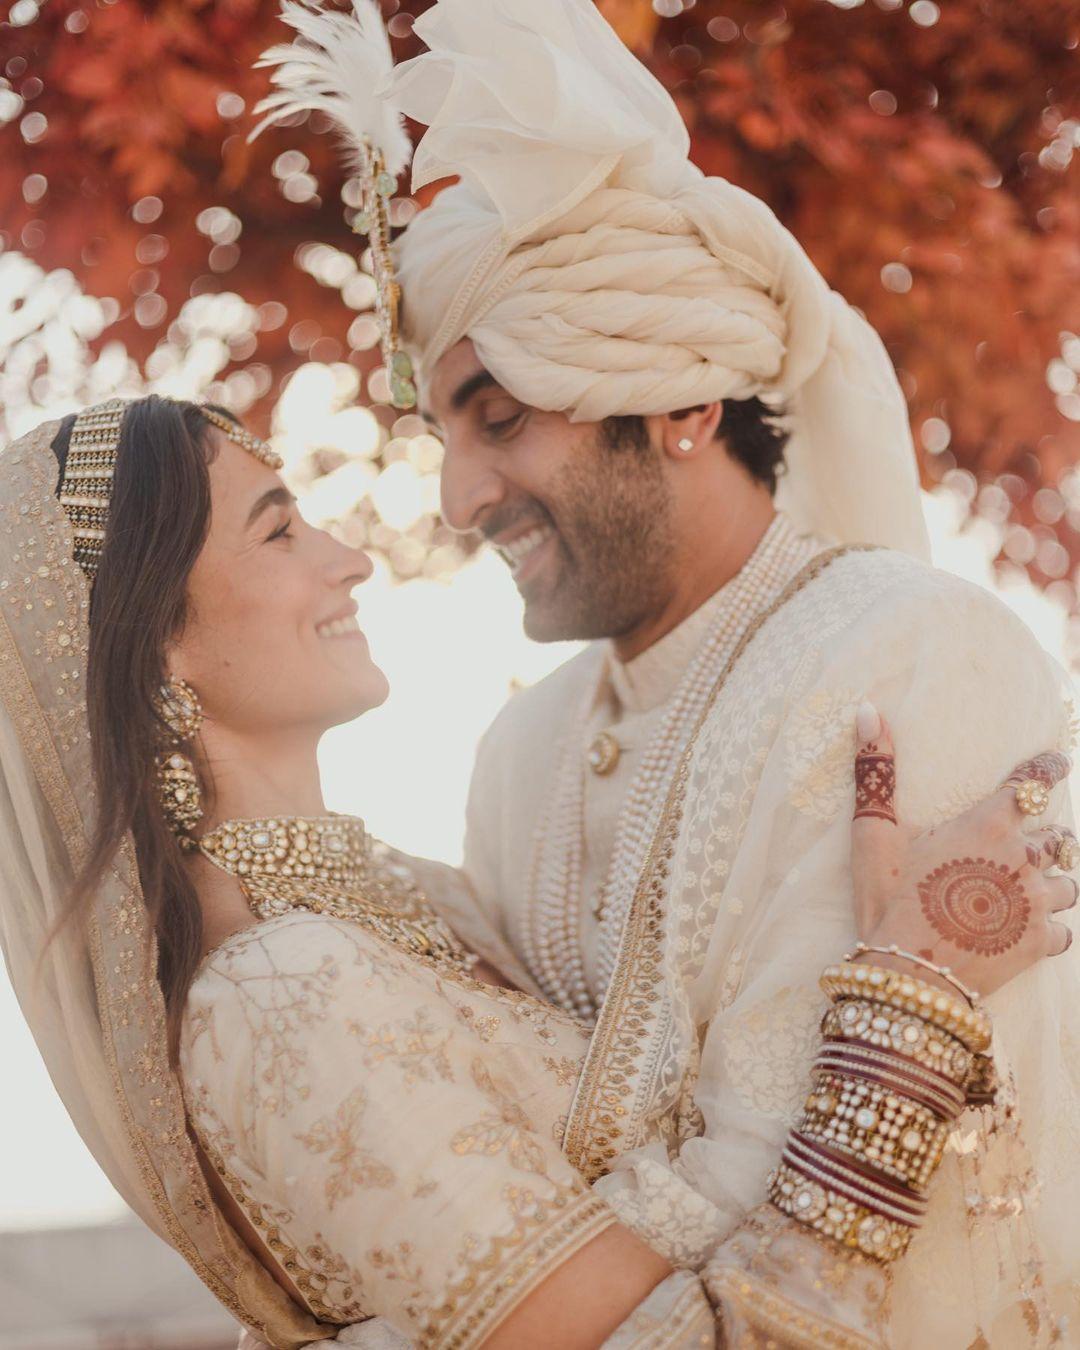 Alia Bhatt shared several pictures on her wedding day, but one moment stood out as particularly amusing and candid. In the photo, Alia is all smiles and can't control her laughter as her husband holds her in his arms. Ranbir Kapoor, meanwhile, appears to be feeling shy but is also smiling.